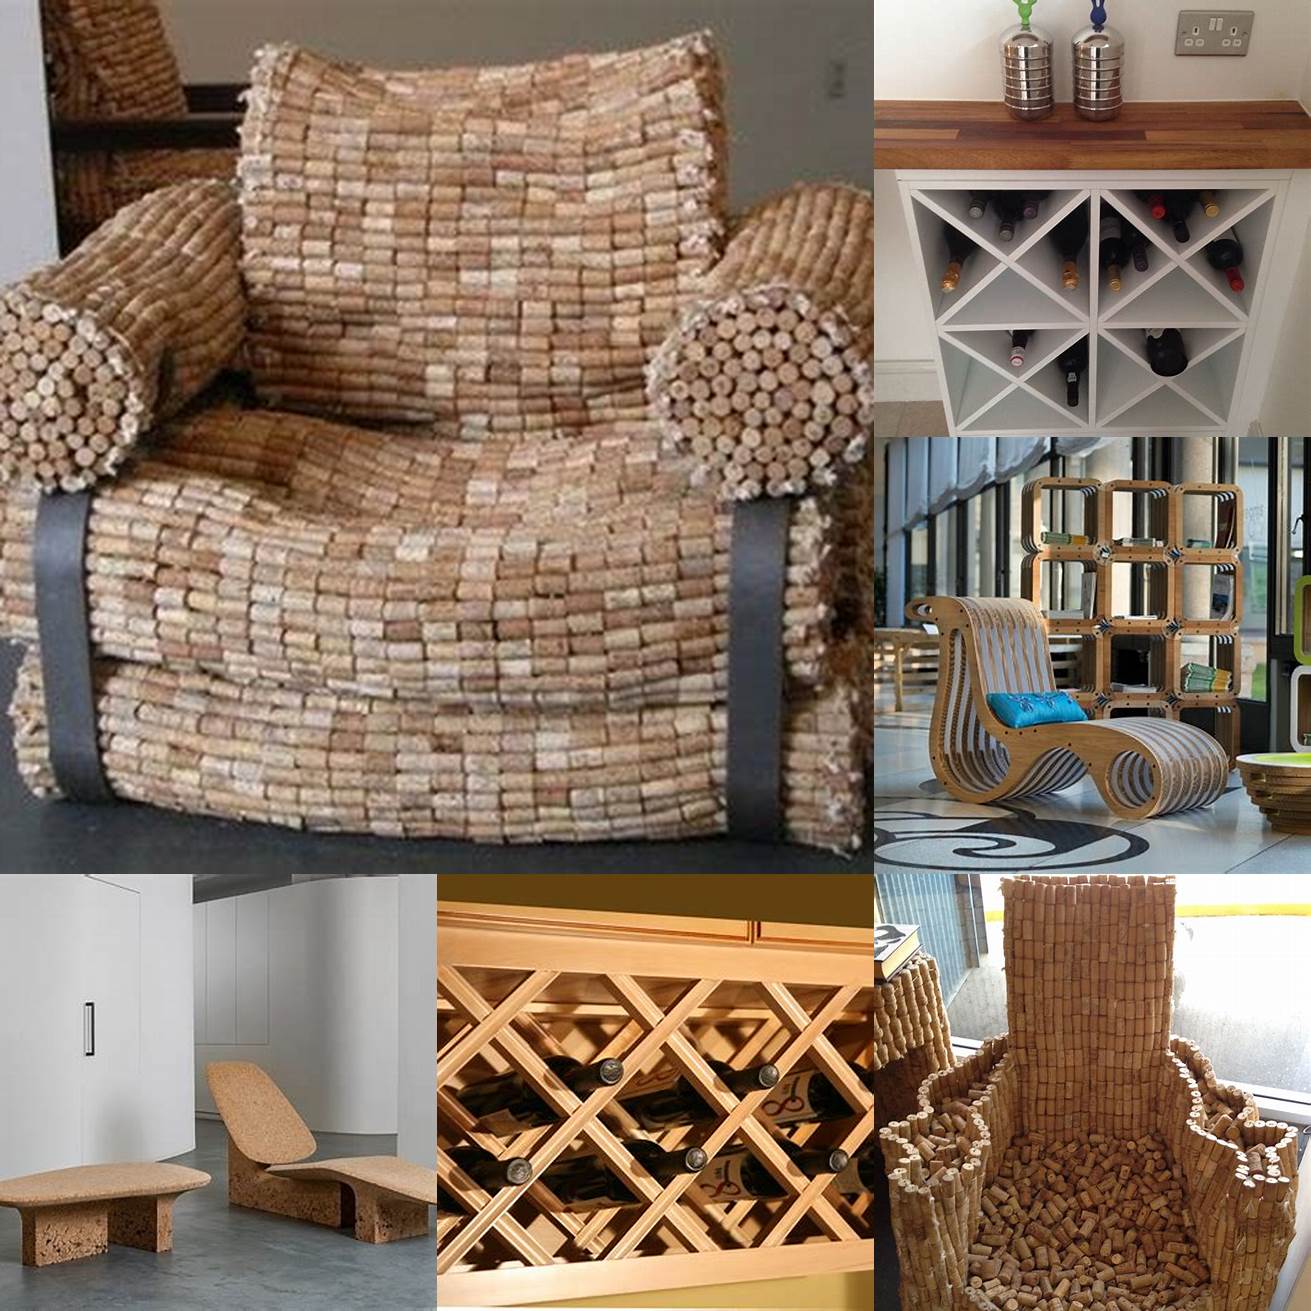 Wine furniture made from sustainable materials